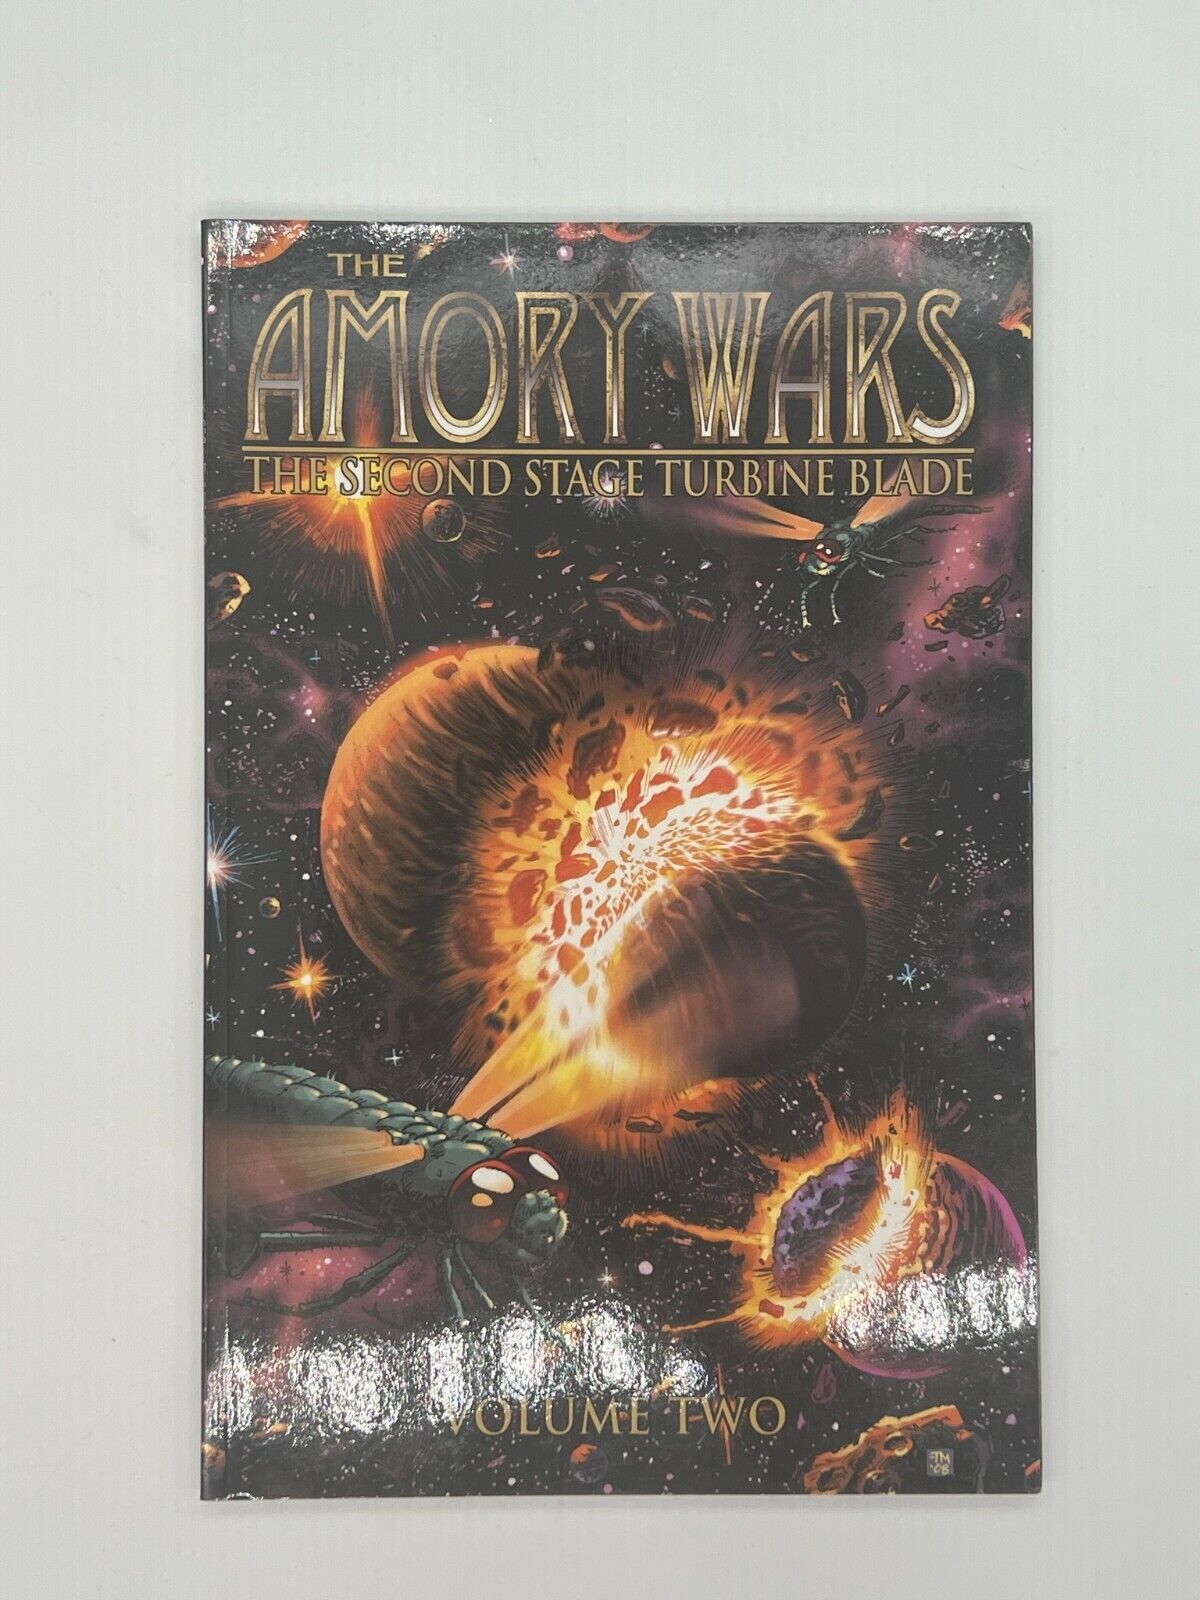 The Amory Wars The Second Stage Turbine Blade Vol 2 Graphic Novel